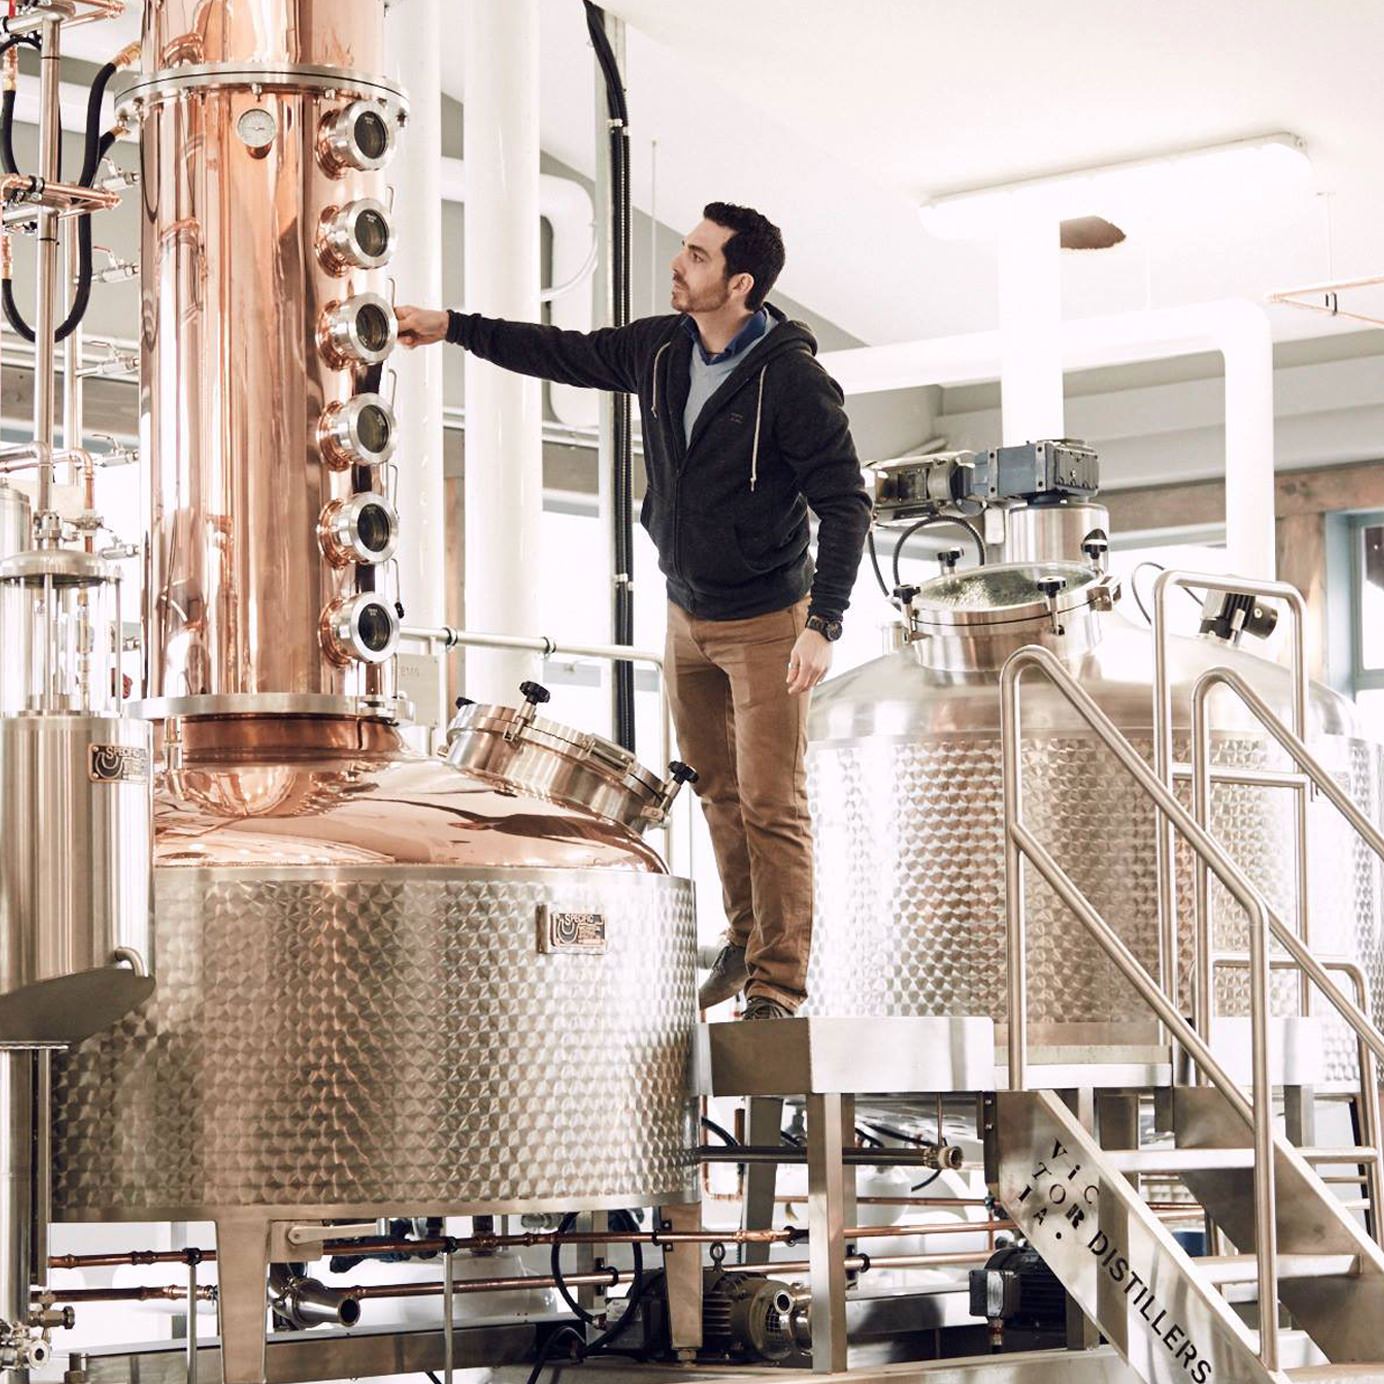 British Columbia Is Suddenly Awash In Craft Spirits. That’s Not an Accident.